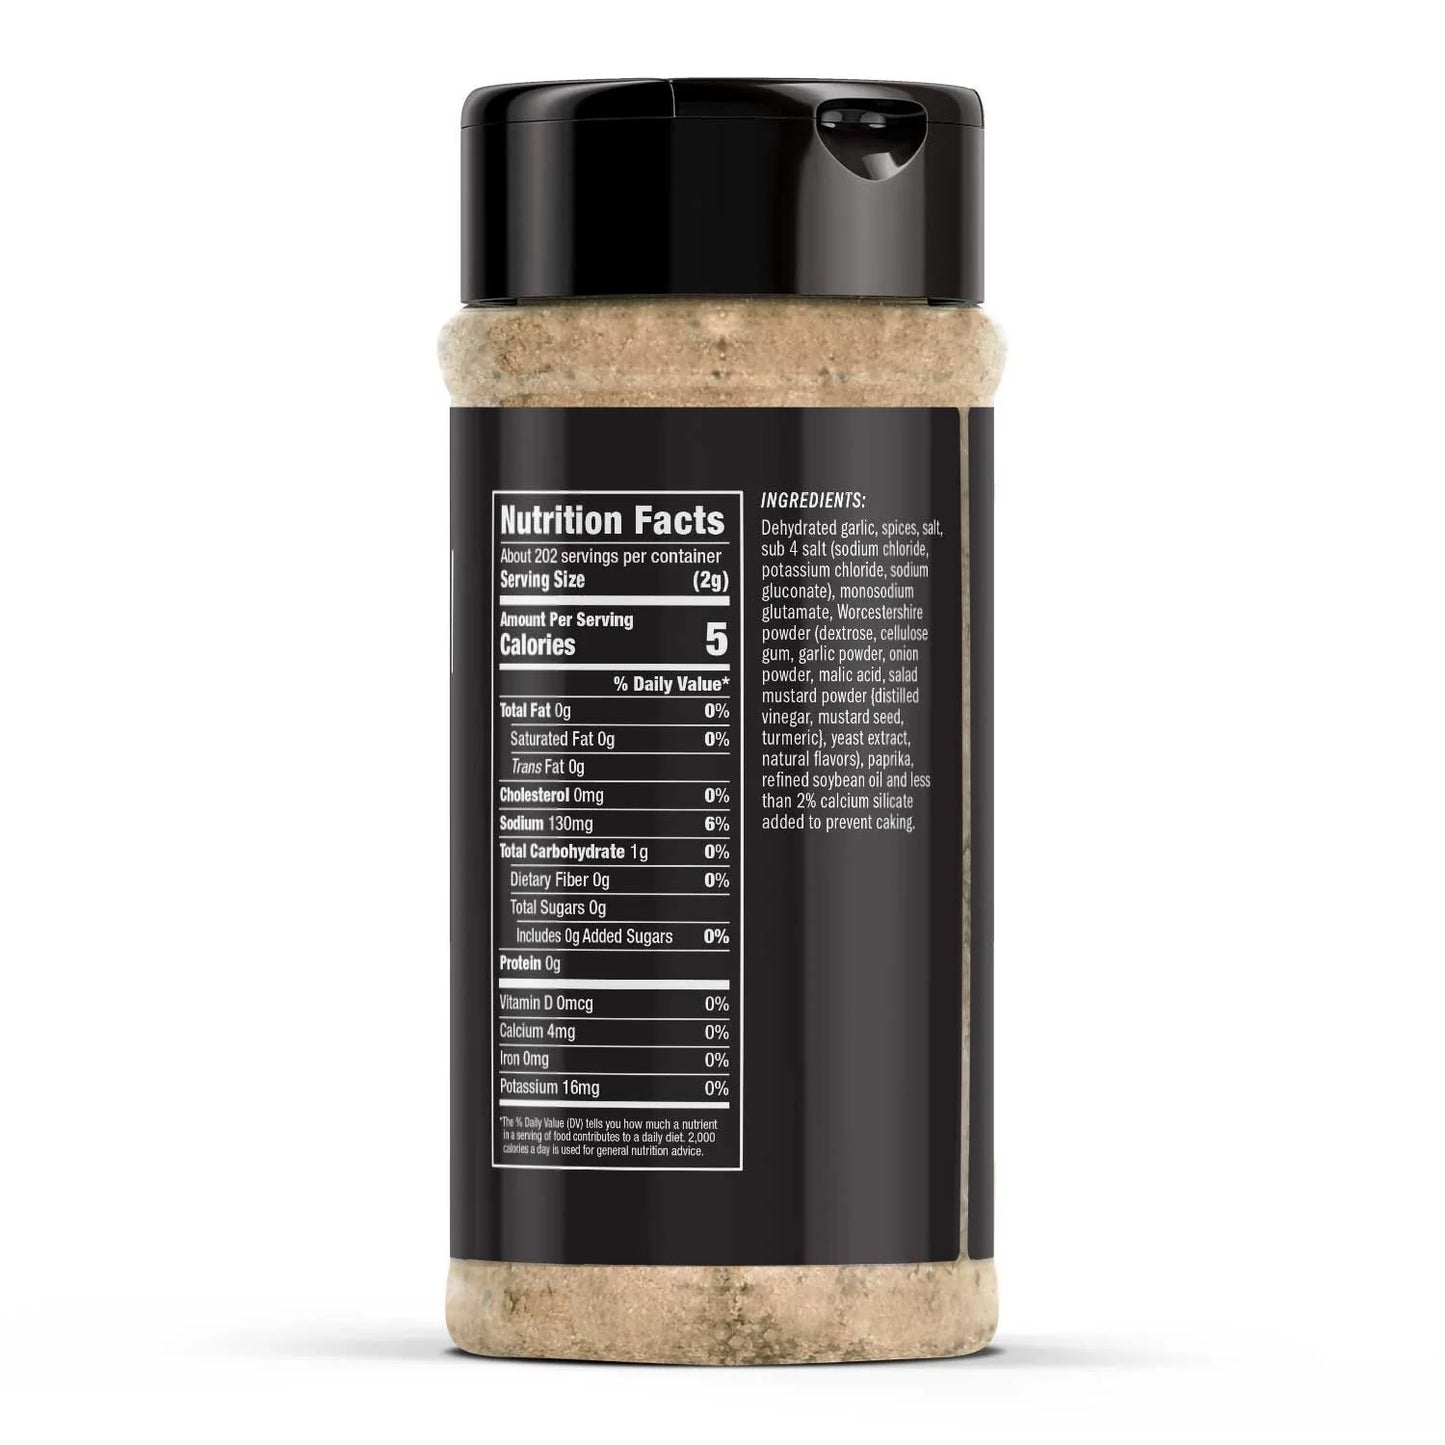 Our top-selling burger rub contains 5 calories per serving.